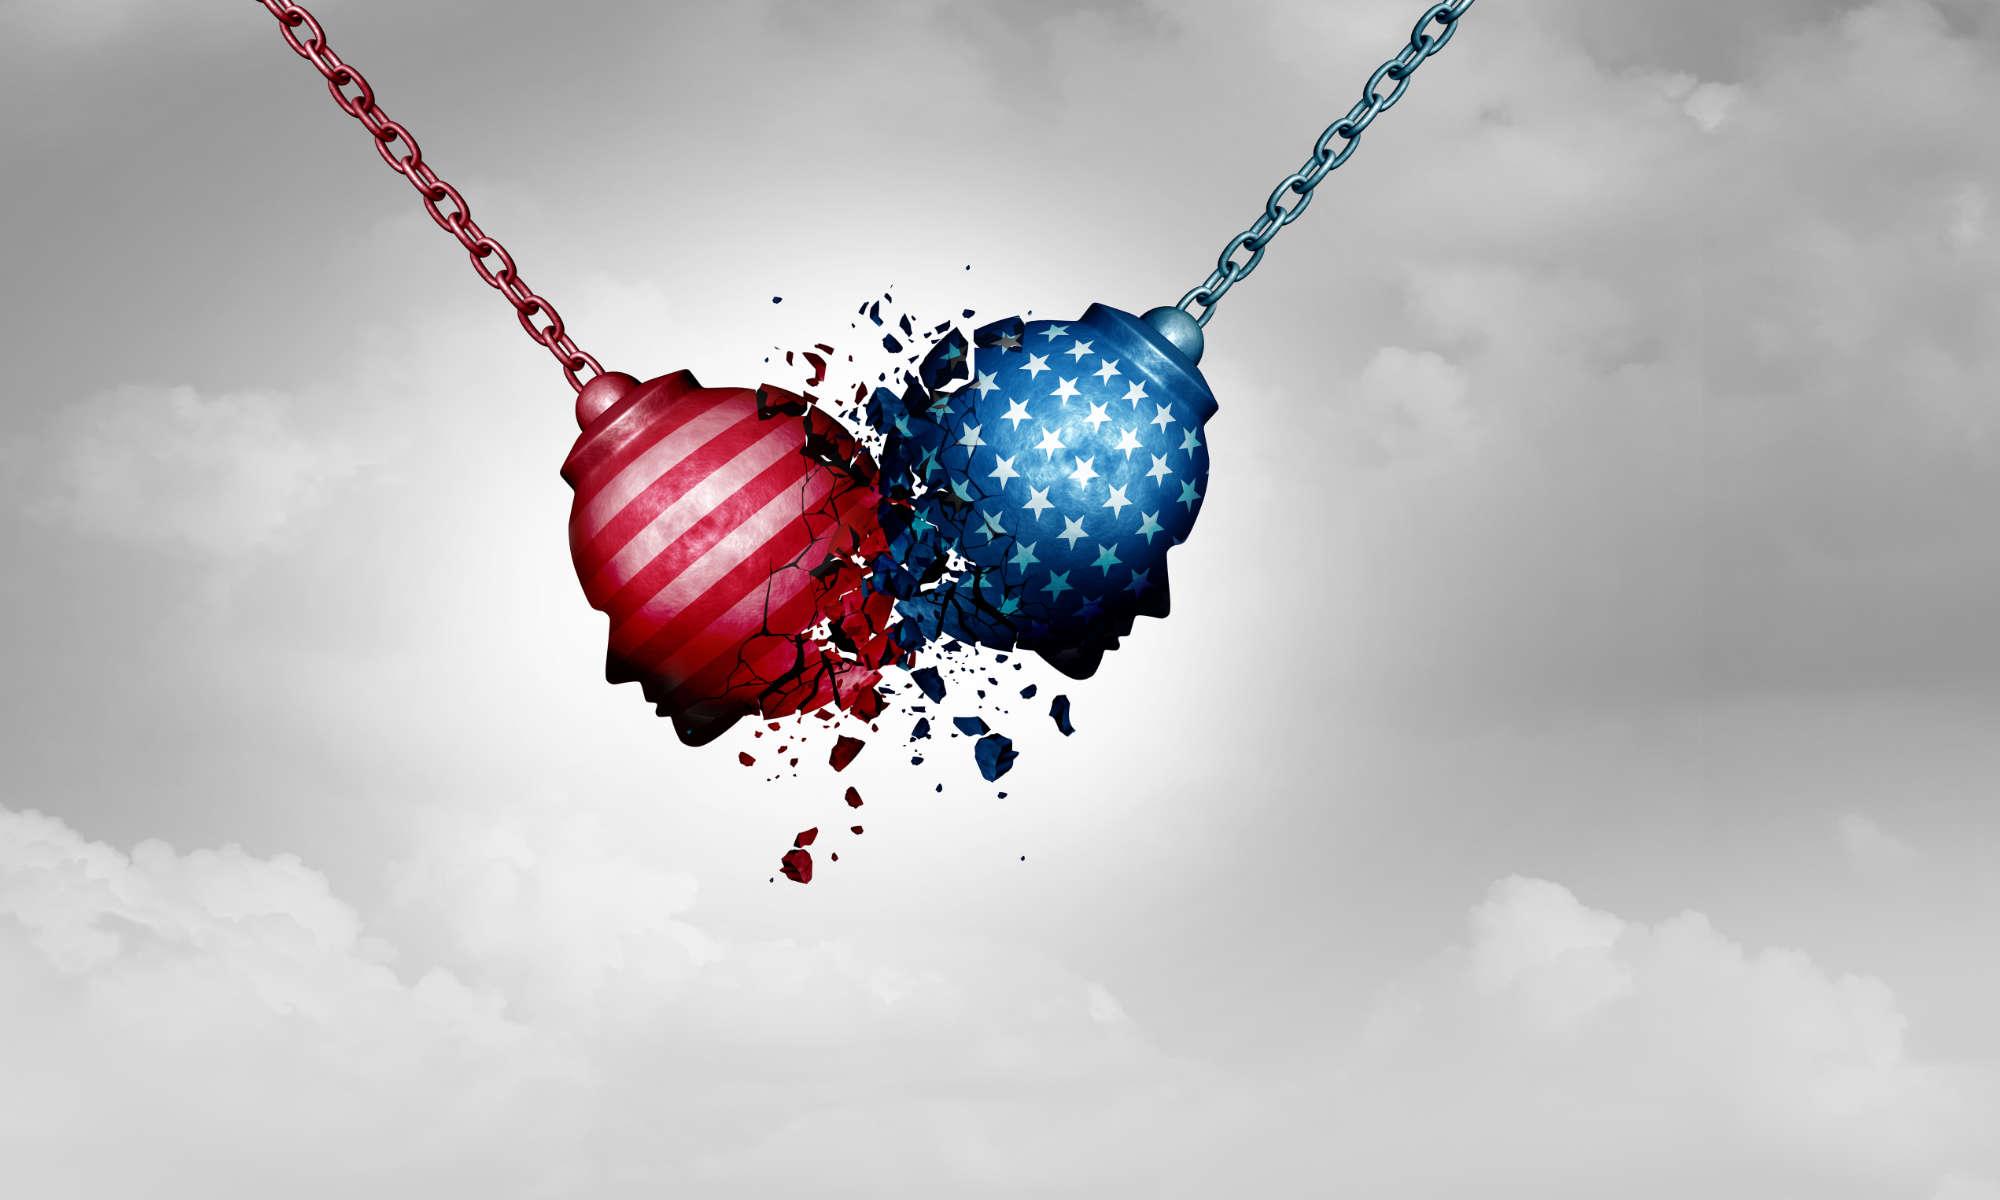 Illustration showing two wrecking balls, one blue with stars and one red with stripes, each with a profile of a face, crashing against each other against a gray background to illustrate partisan hostility in American democracy.